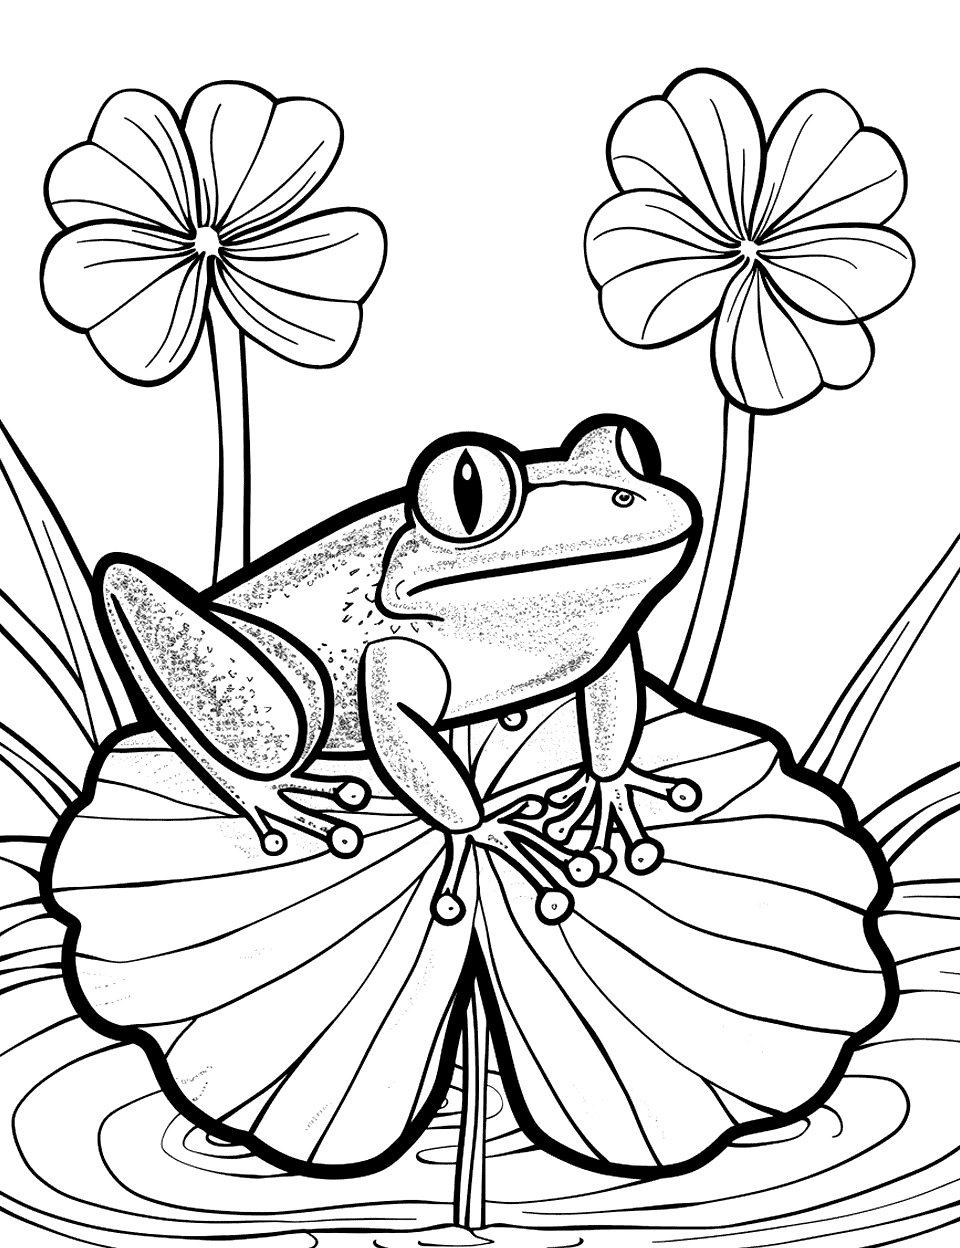 Frog Sitting on a Shamrock Leaf Coloring Page - A frog perched serenely on a large shamrock leaf by a pond.